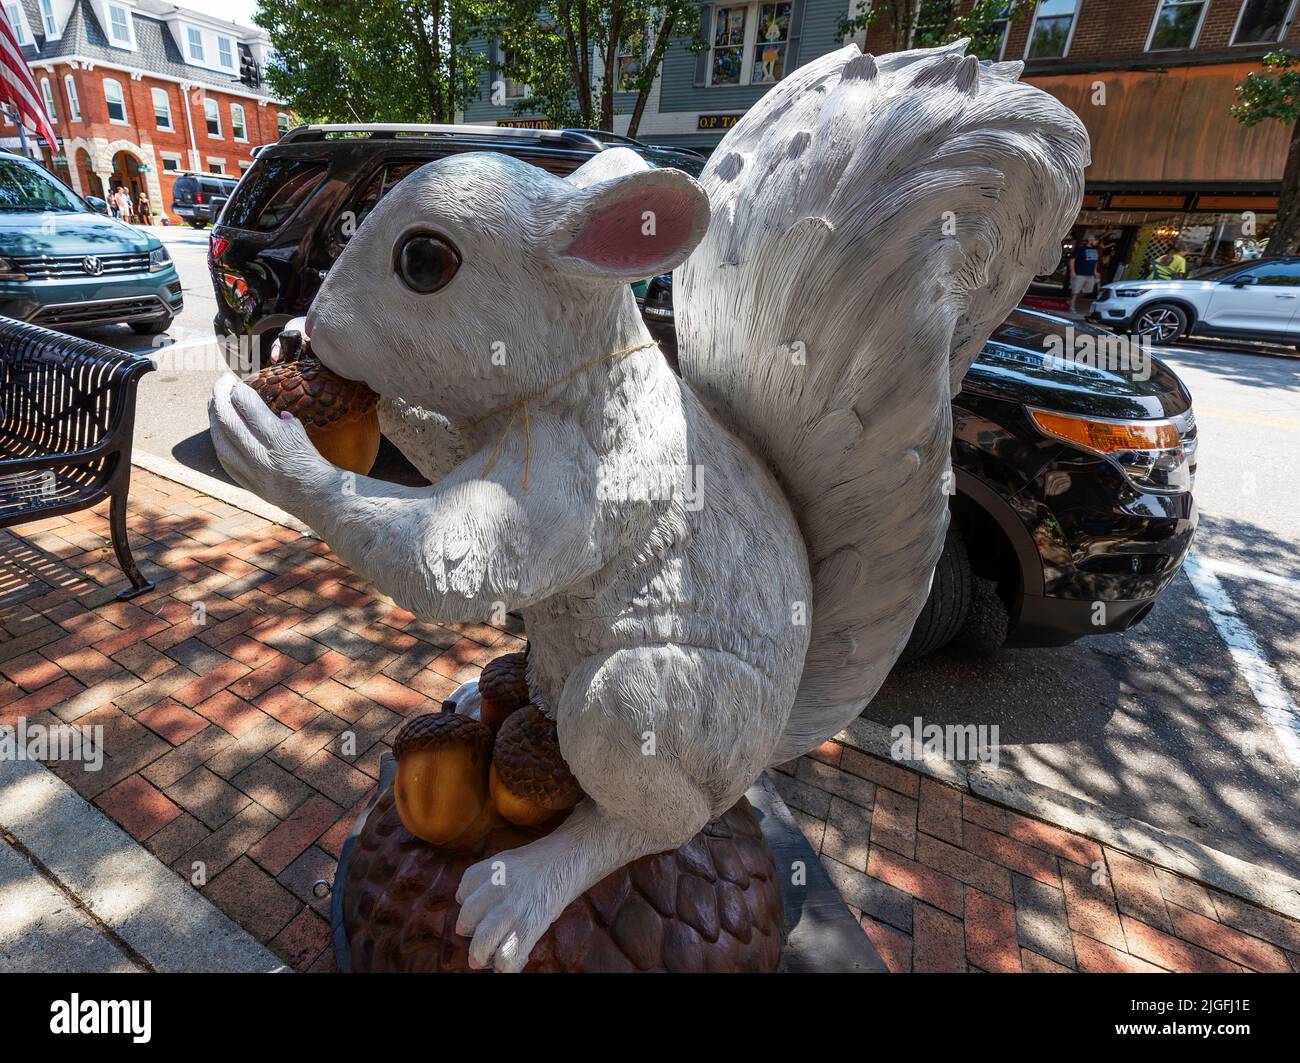 Brevard, North Carolina, USA - June 25, 2022: The White Squireel is famous where,Tourist and residents co mingle in this little town where quaint shop Stock Photo